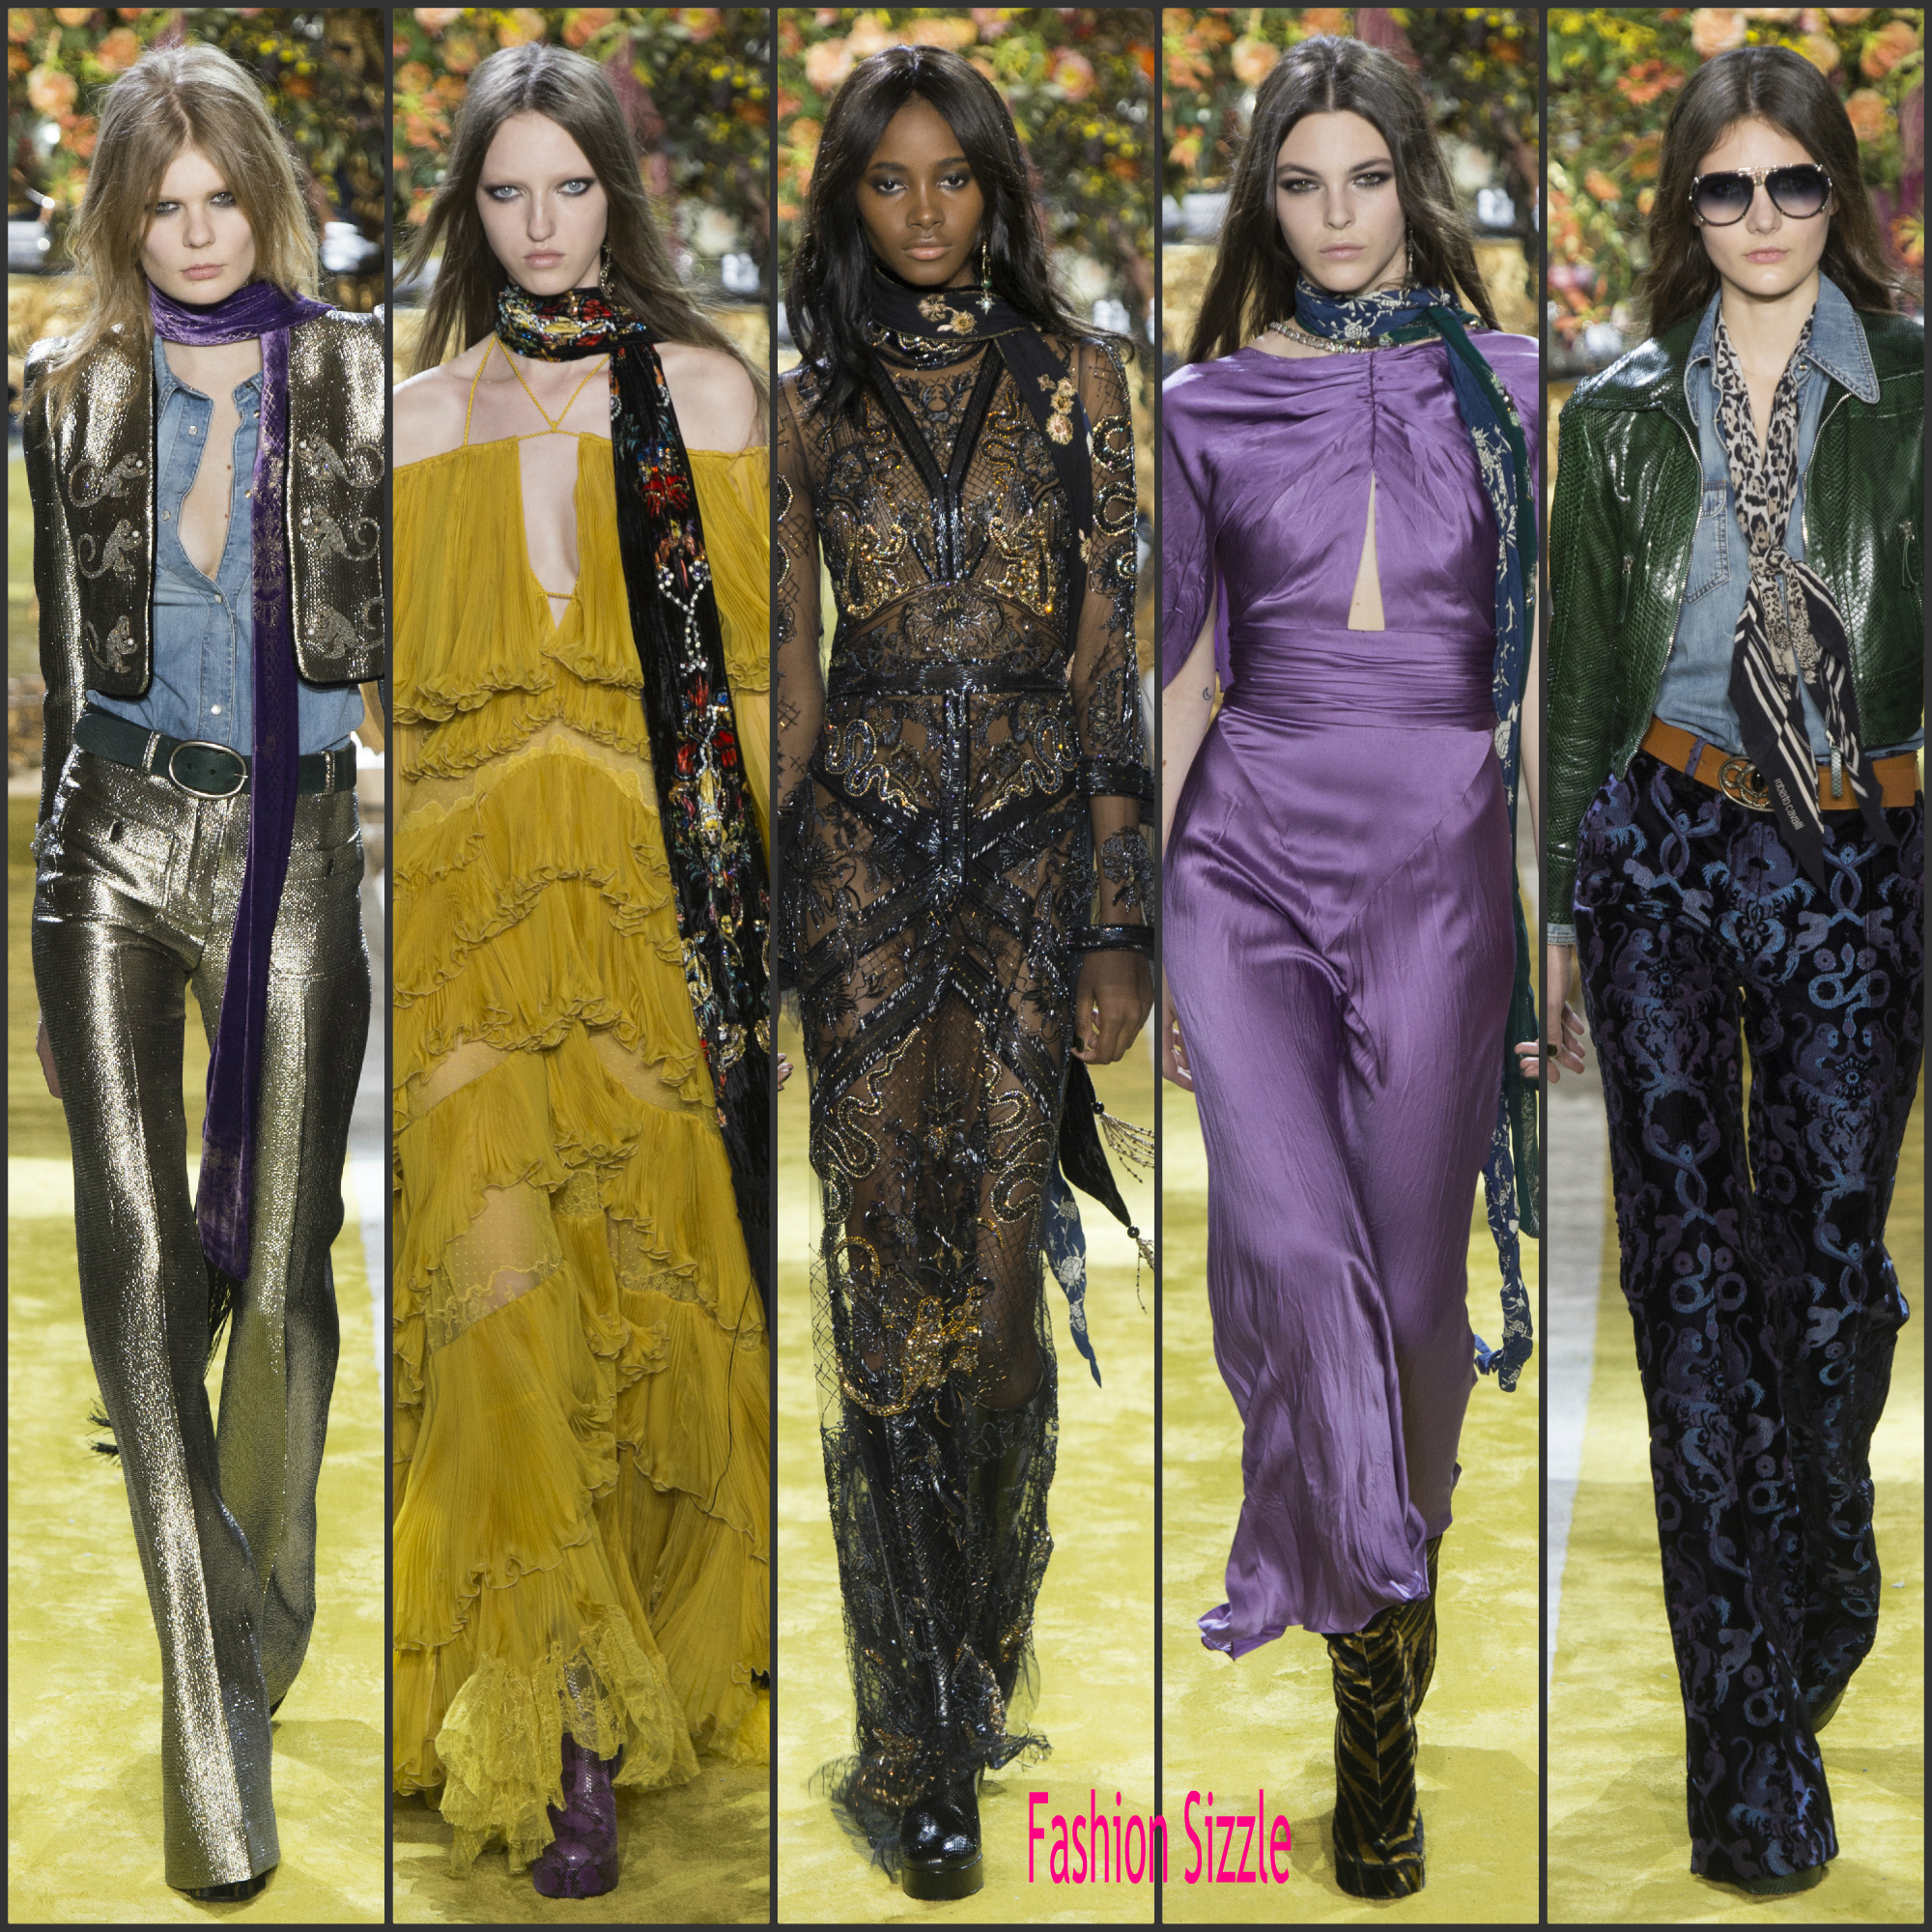 roberto-cavalli-fall-2016-ready-to-wear-collection